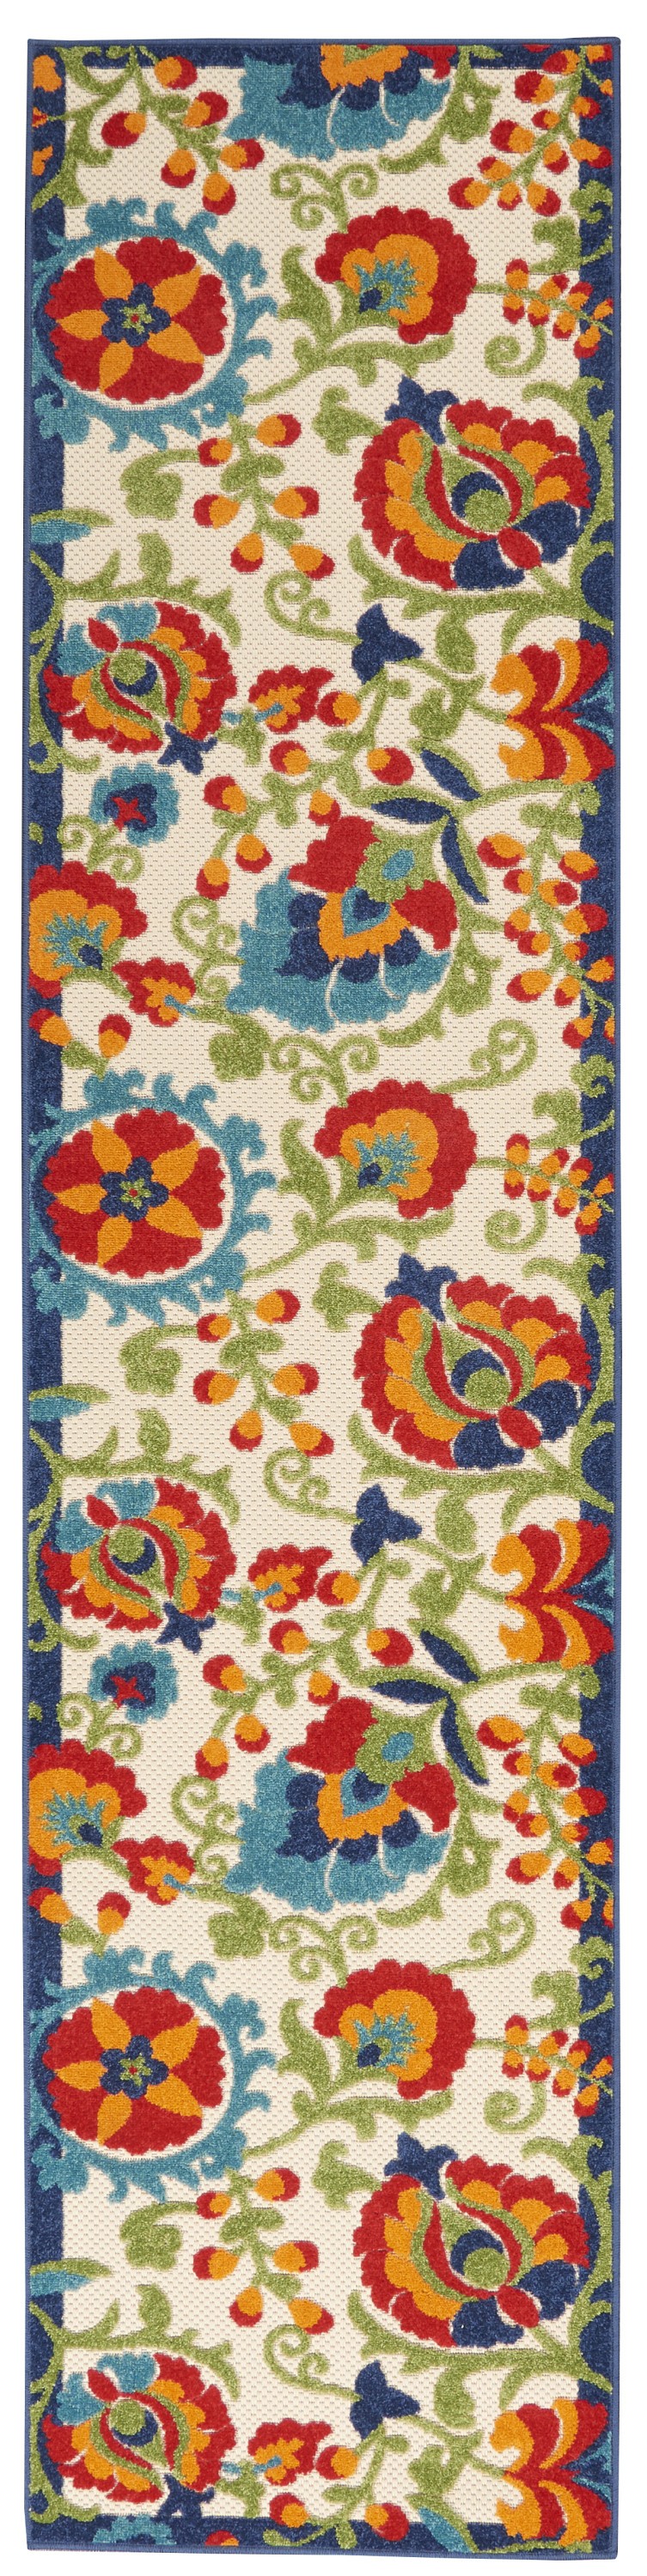 2' X 10' Green And Ivory Floral Indoor Outdoor Area Rug-384782-1